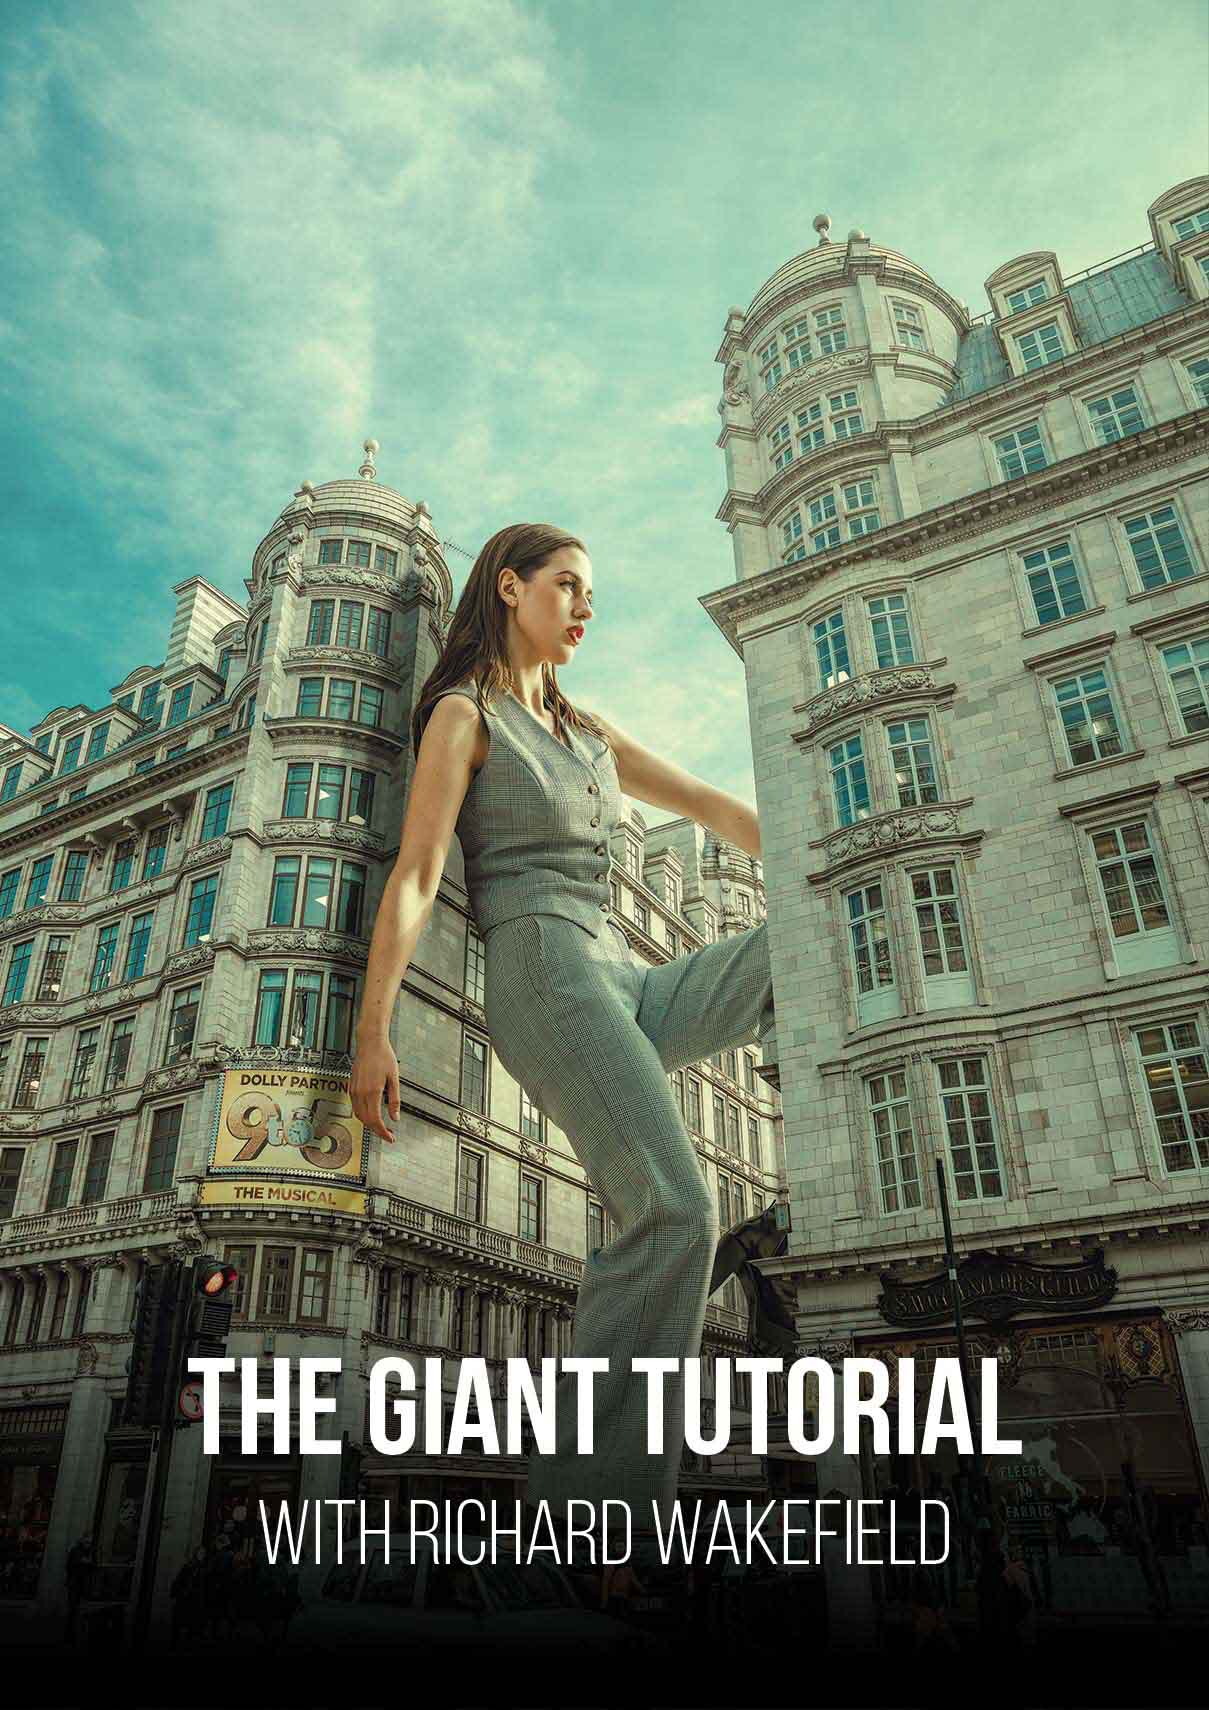 how to photoshop and make people look like giants in a city.